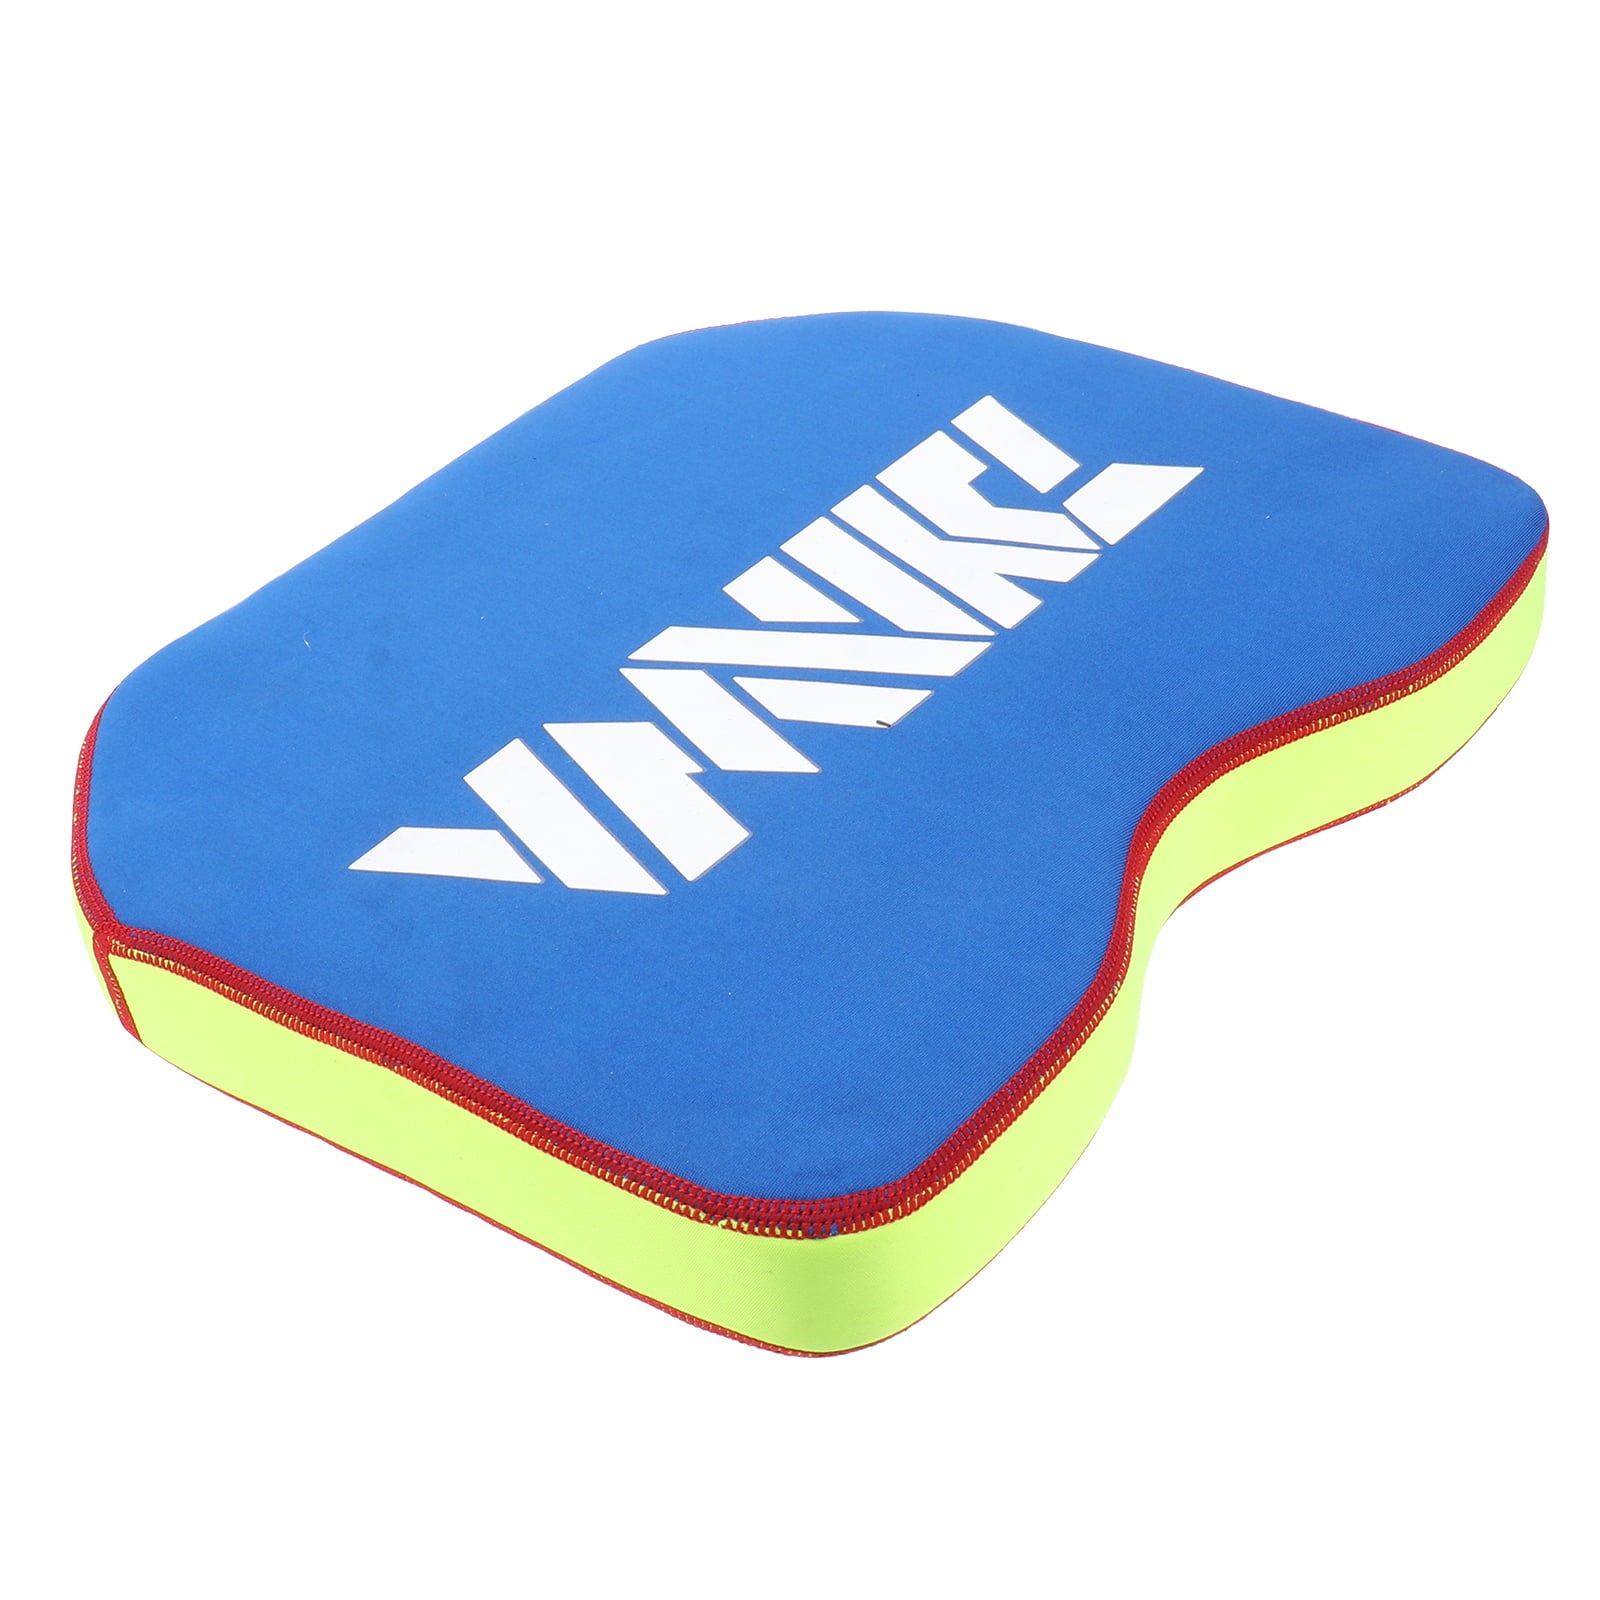 NUOLUX Seat Cushion Comfortable Thicken Canoe Fishing Boat Seat Cushion Pad with Suction Cups for Kayaking Fishing Camping(Blue)